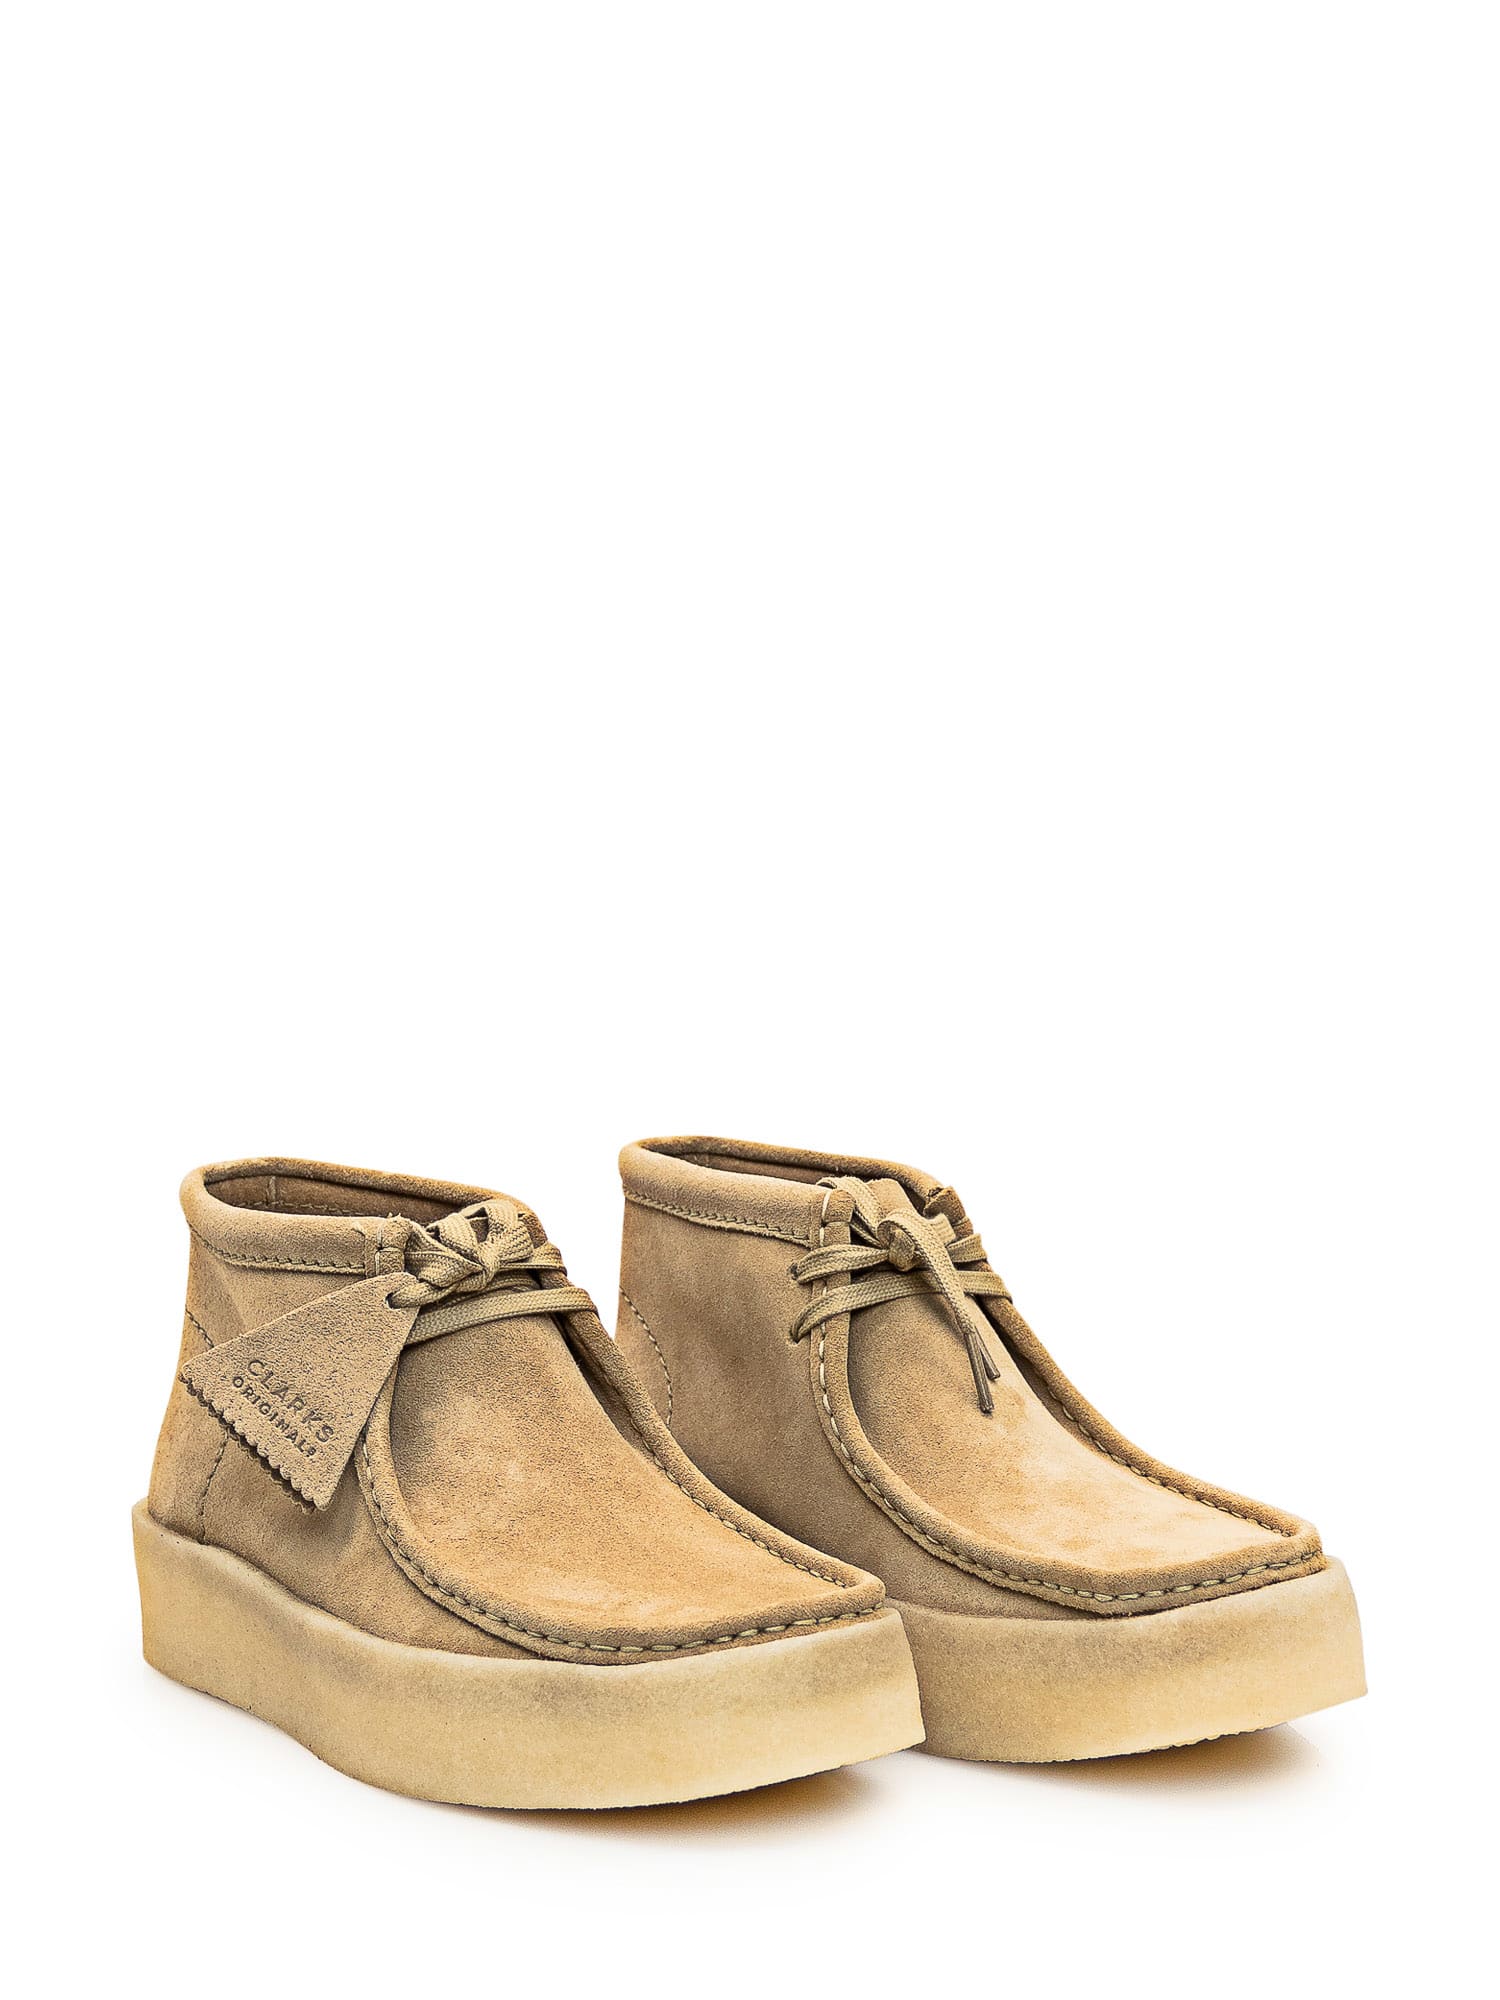 Shop Clarks Wallabeecup Boots In Maple Suede